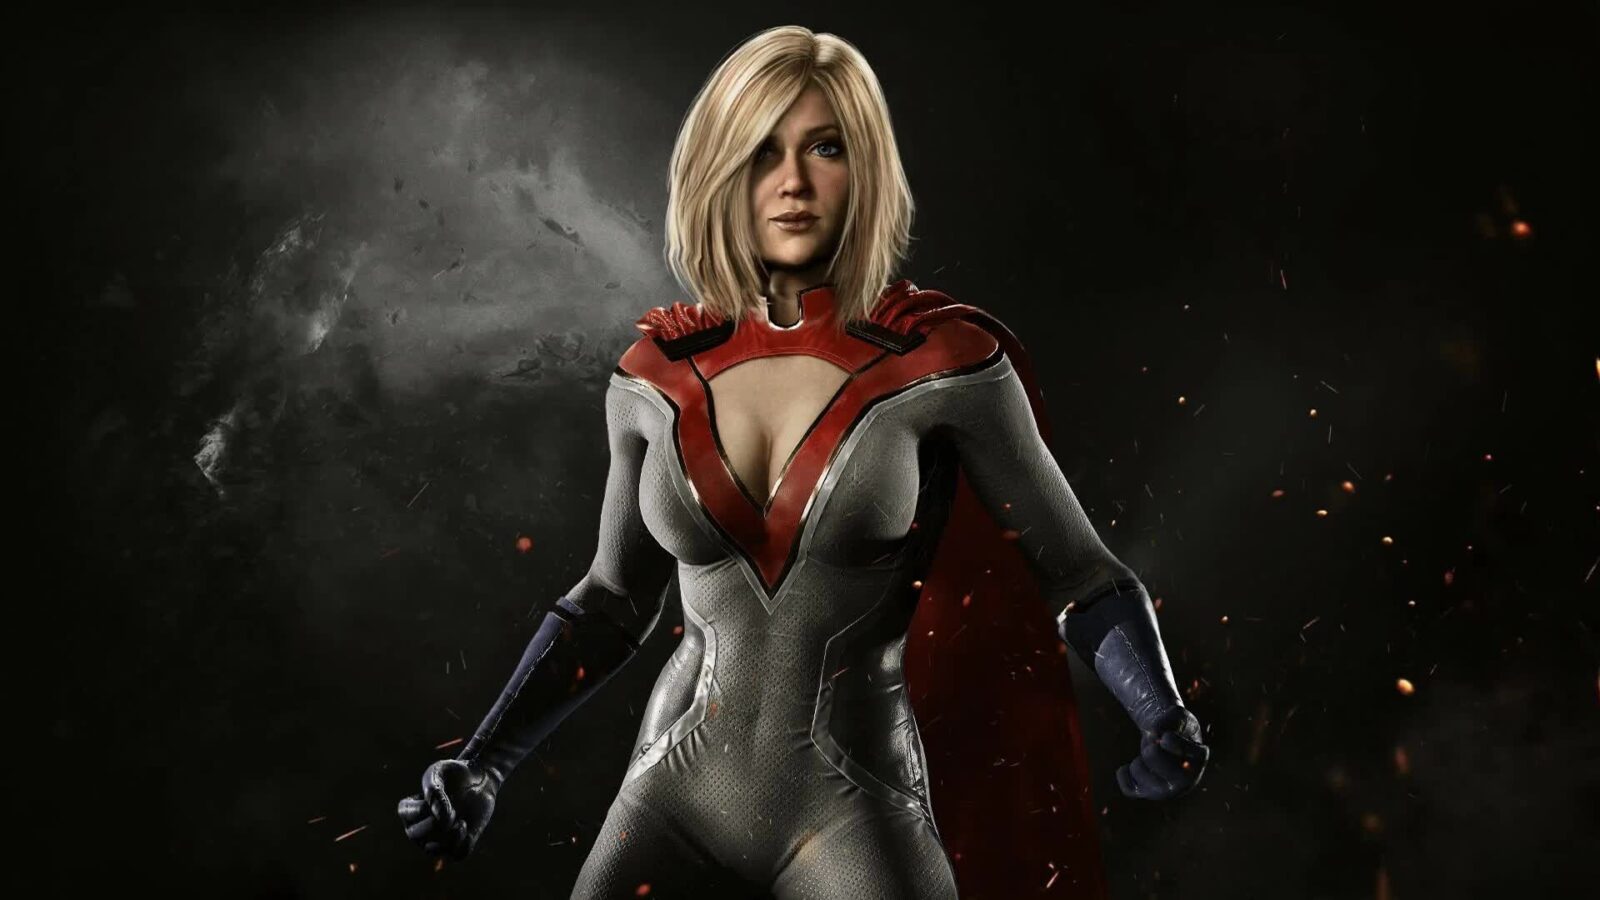 LiveWallpapers4Free.com | Power Girl Injustice 2 Game - Free Live Wallpaper